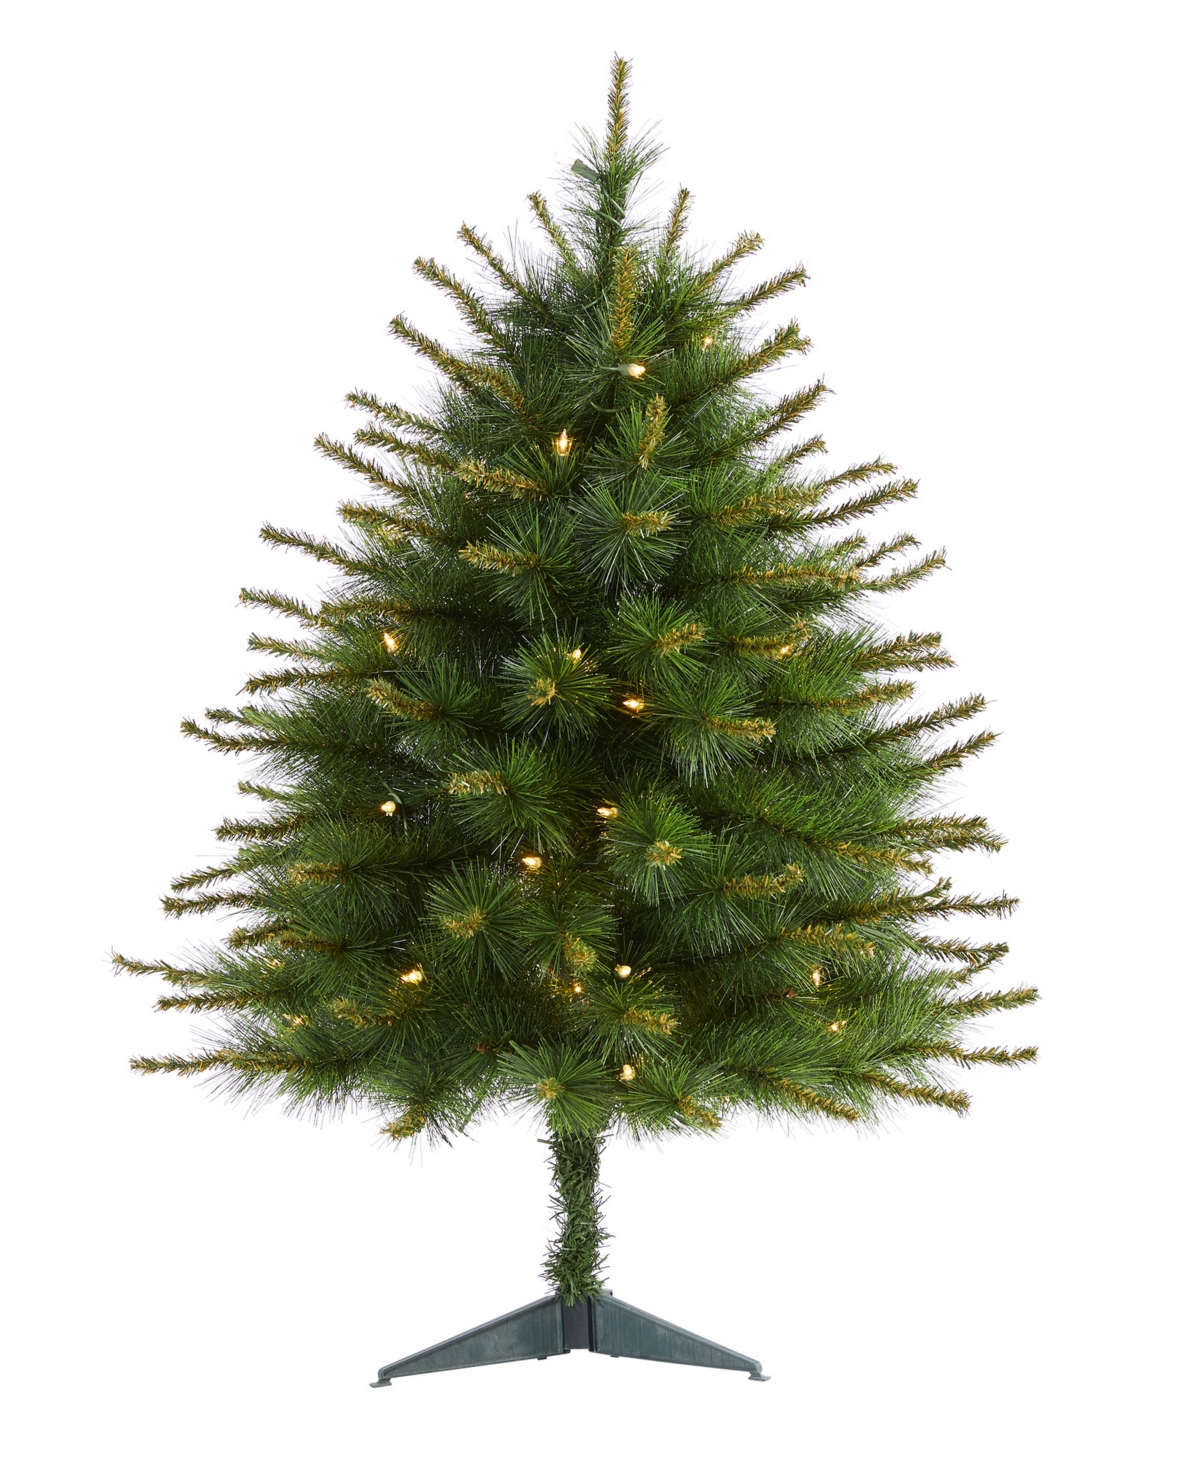 New England Pine Artificial Christmas Tree with Lights and Bendable Branches, 36" - Green